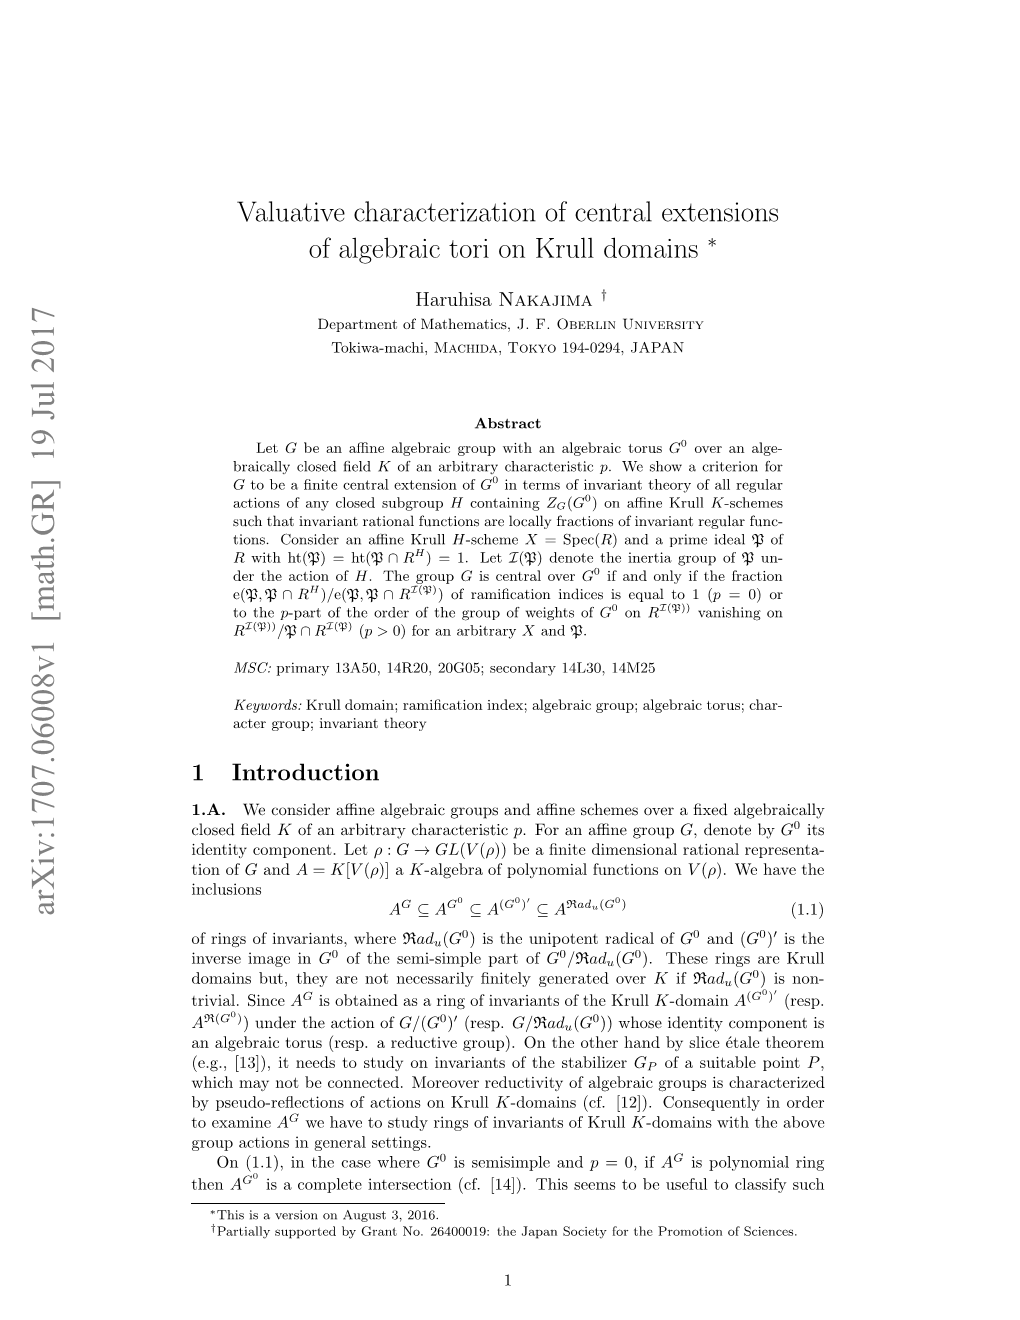 Valuative Characterization of Central Extensions of Algebraic Tori on Krull